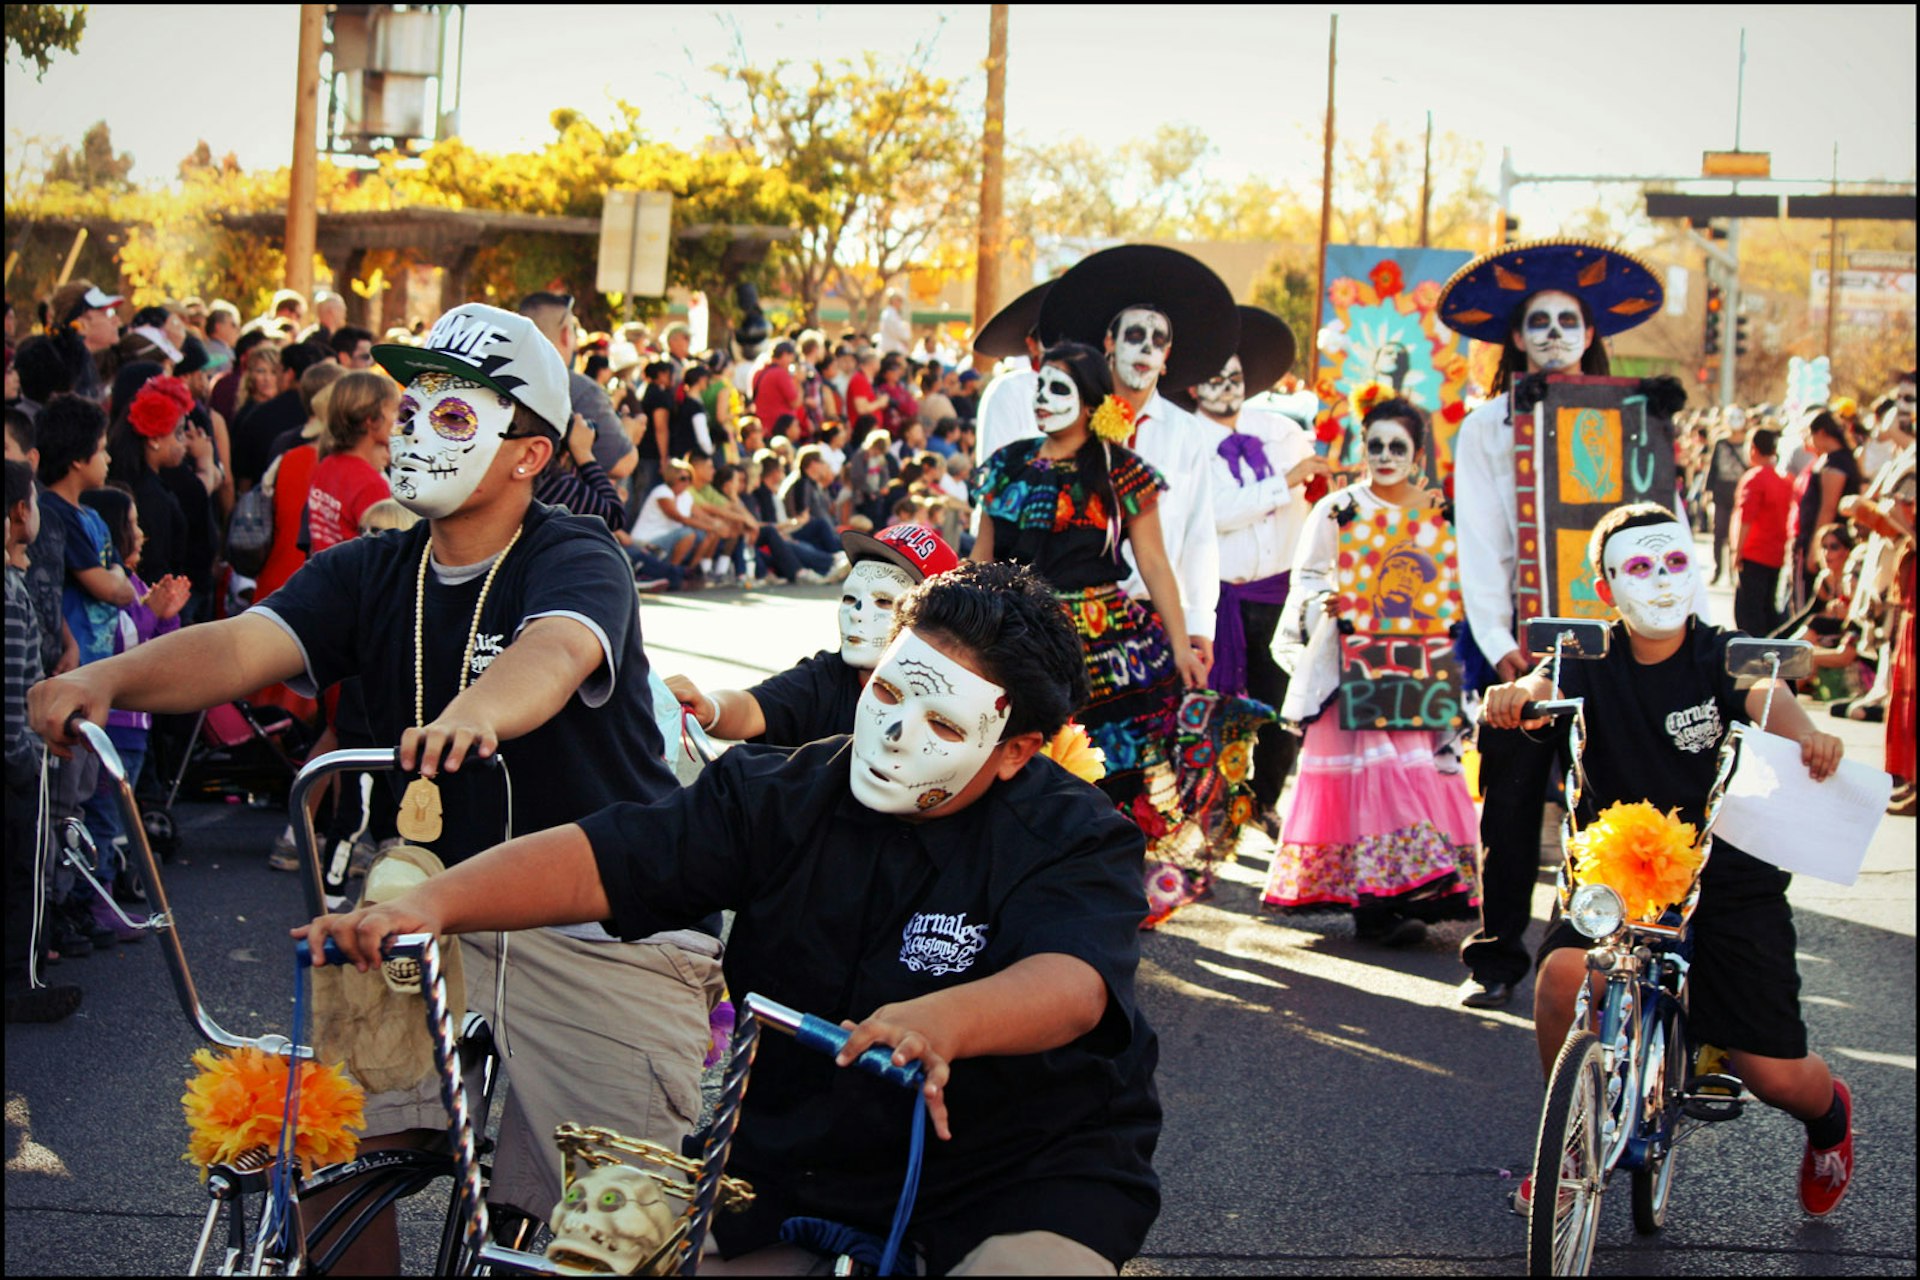 boys ride their bikes with their faces painted in the Calavera style in a parade